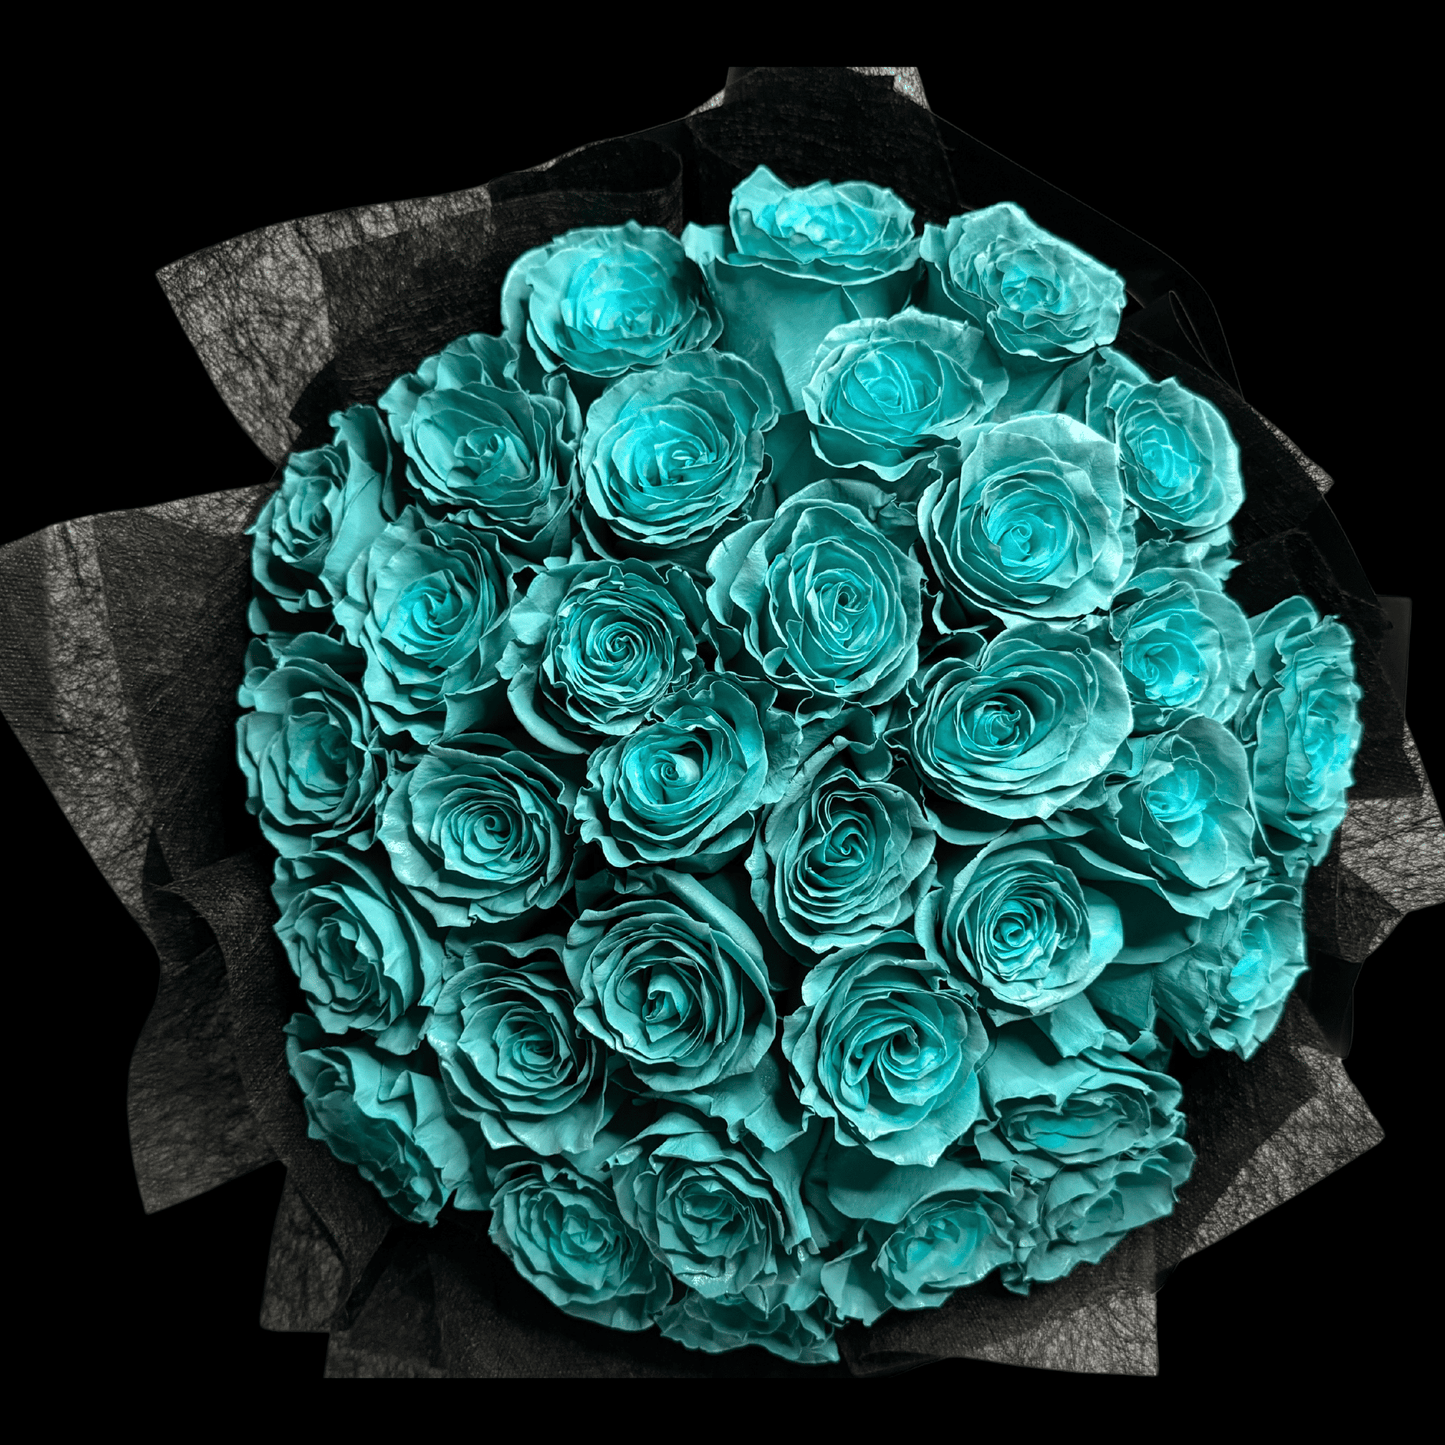 Tiffany's Rose Bouquet